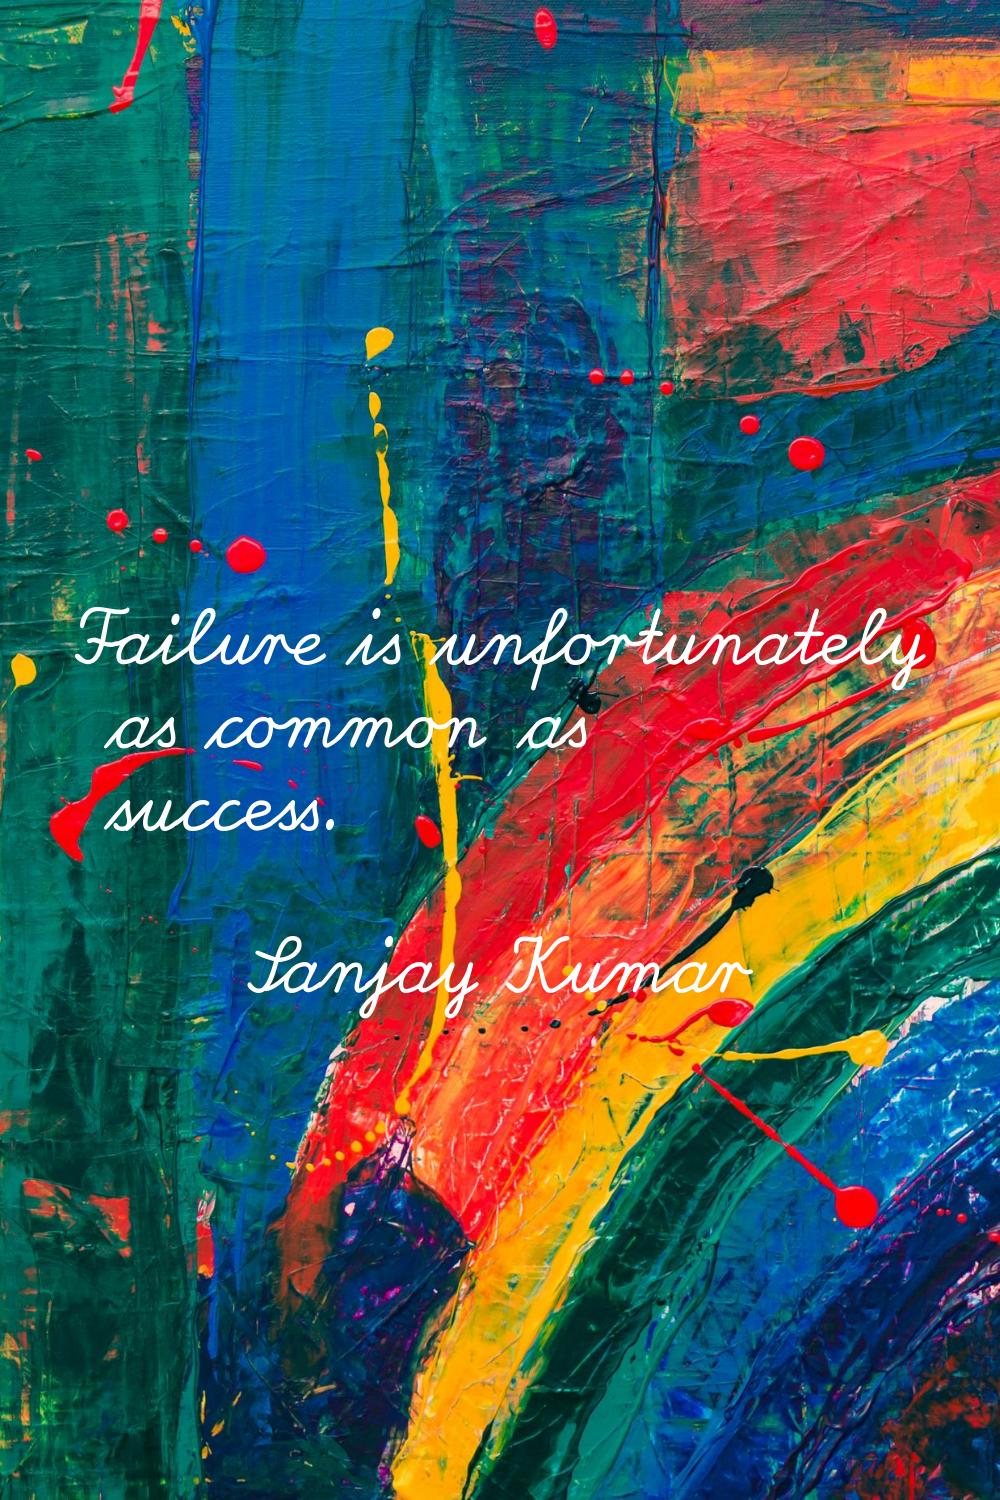 Failure is unfortunately as common as success.